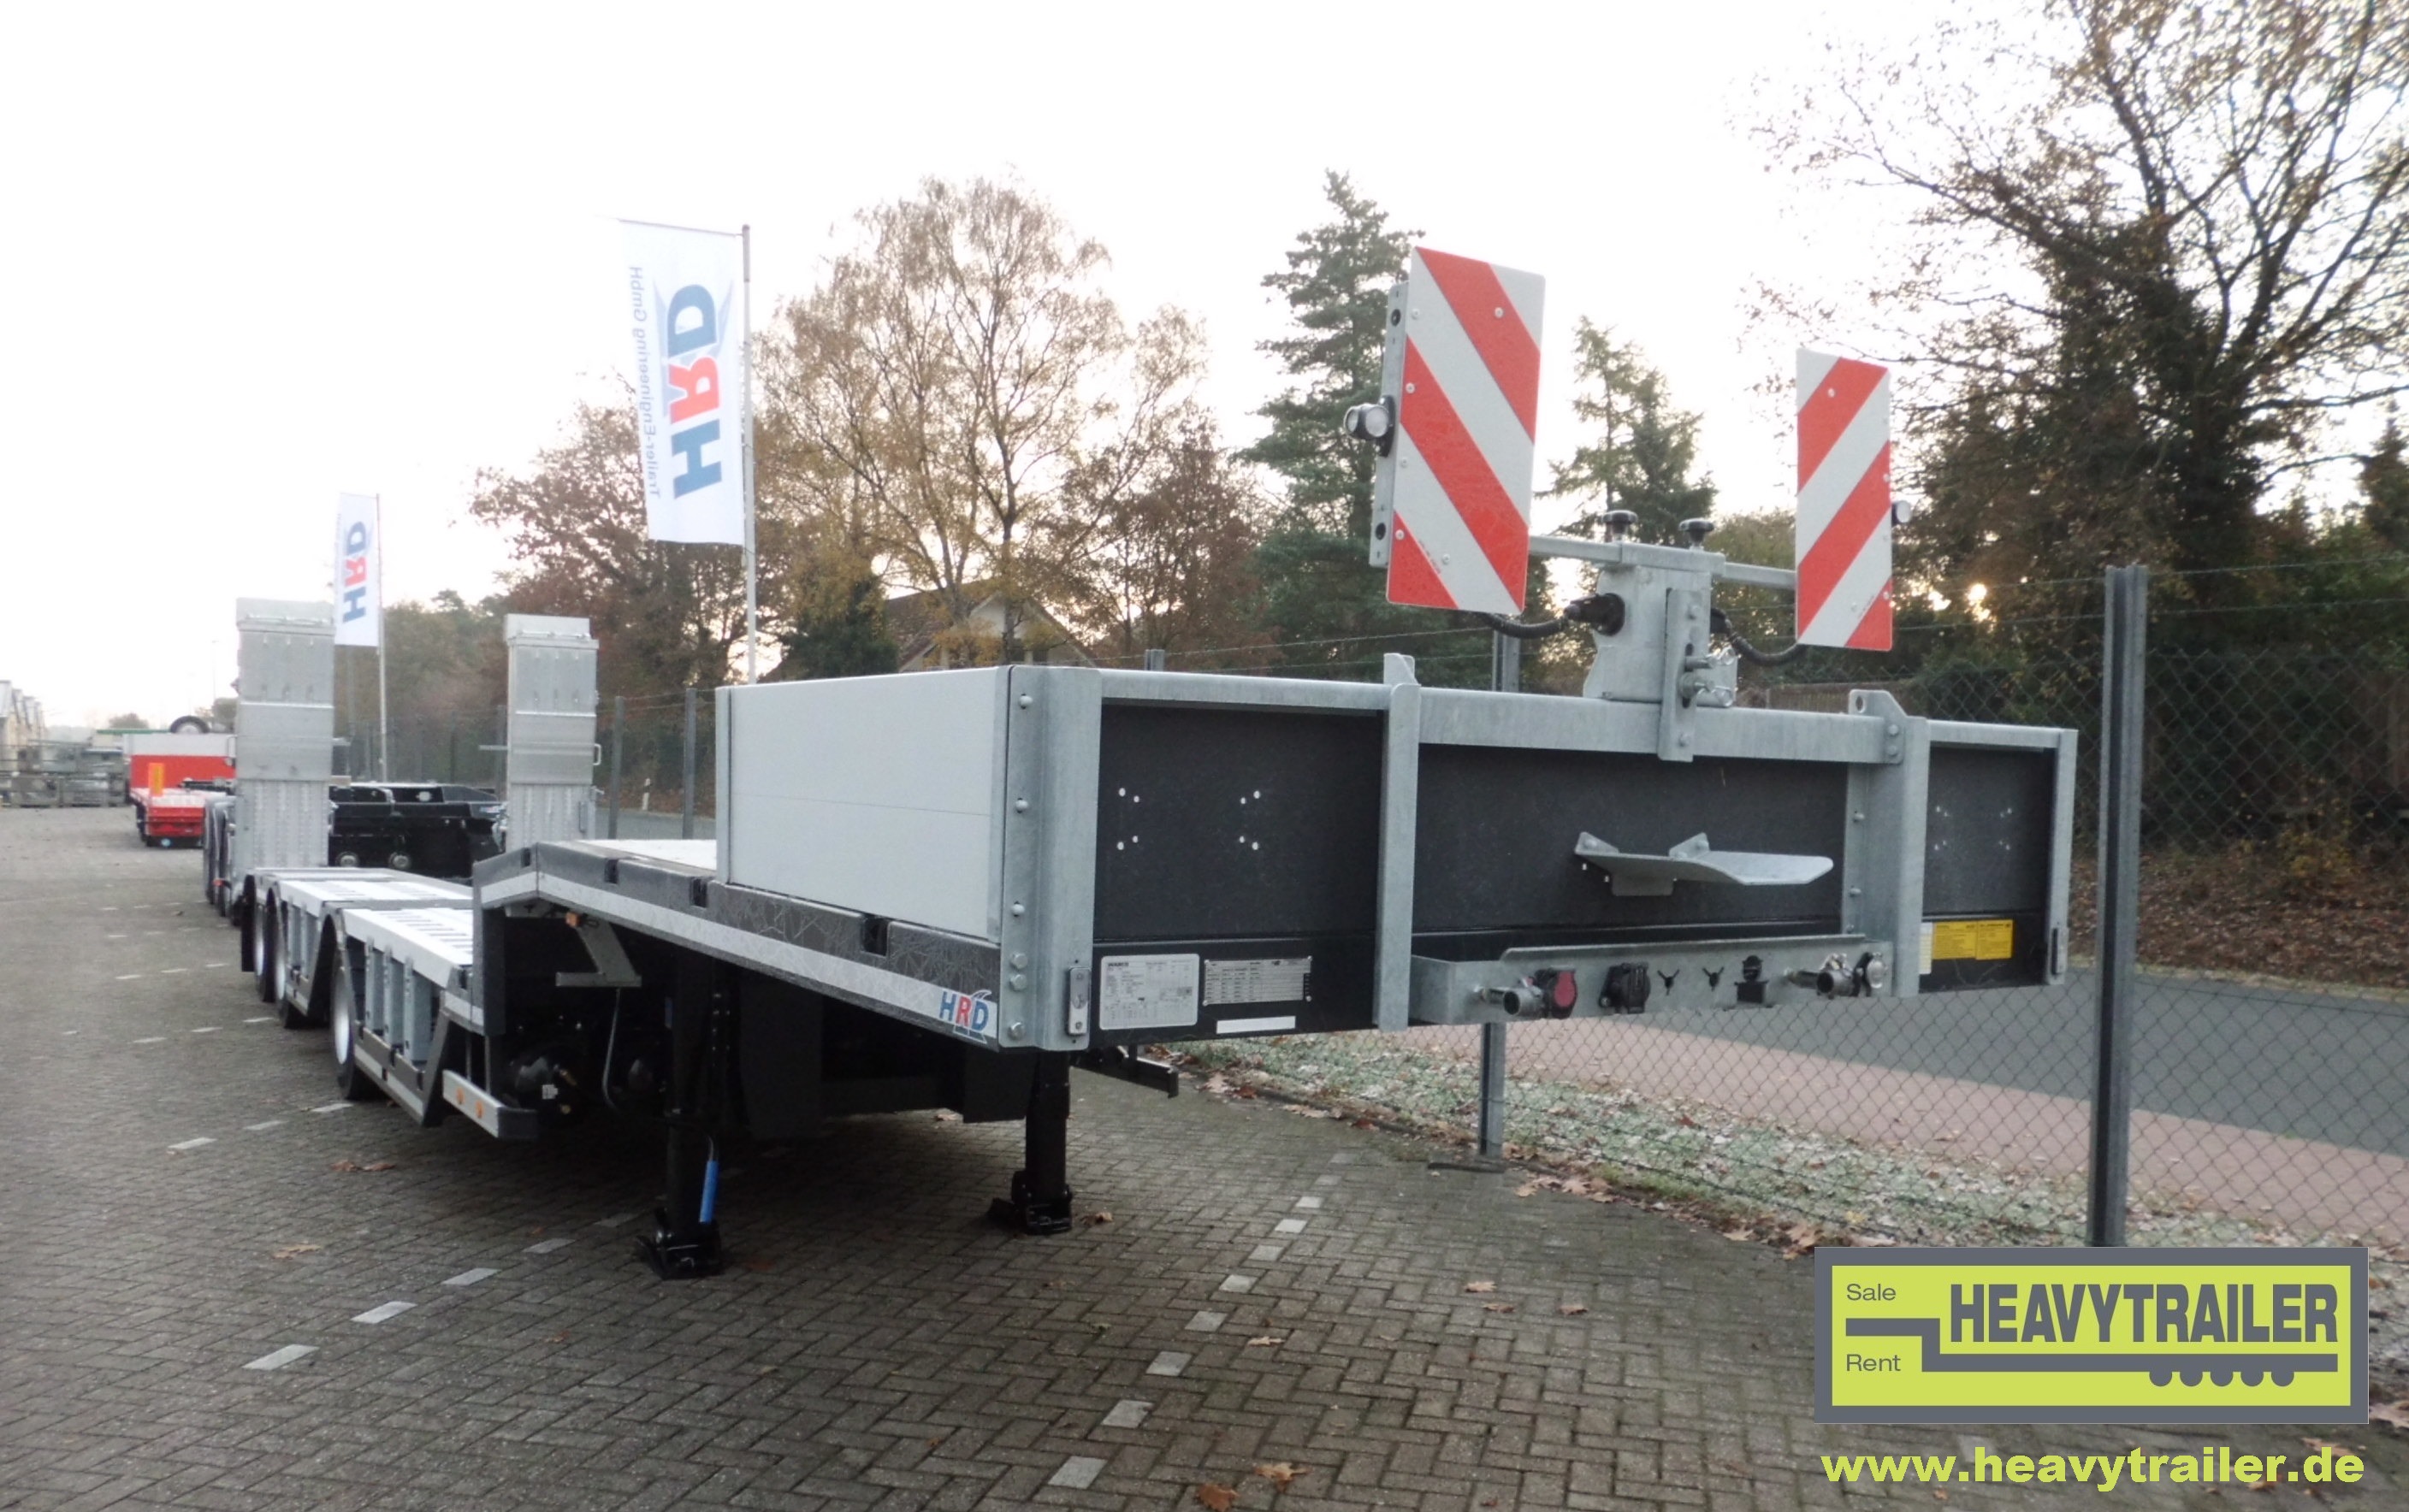 HRD 3-axle-low-bed-trailer with wheel recess and ramps